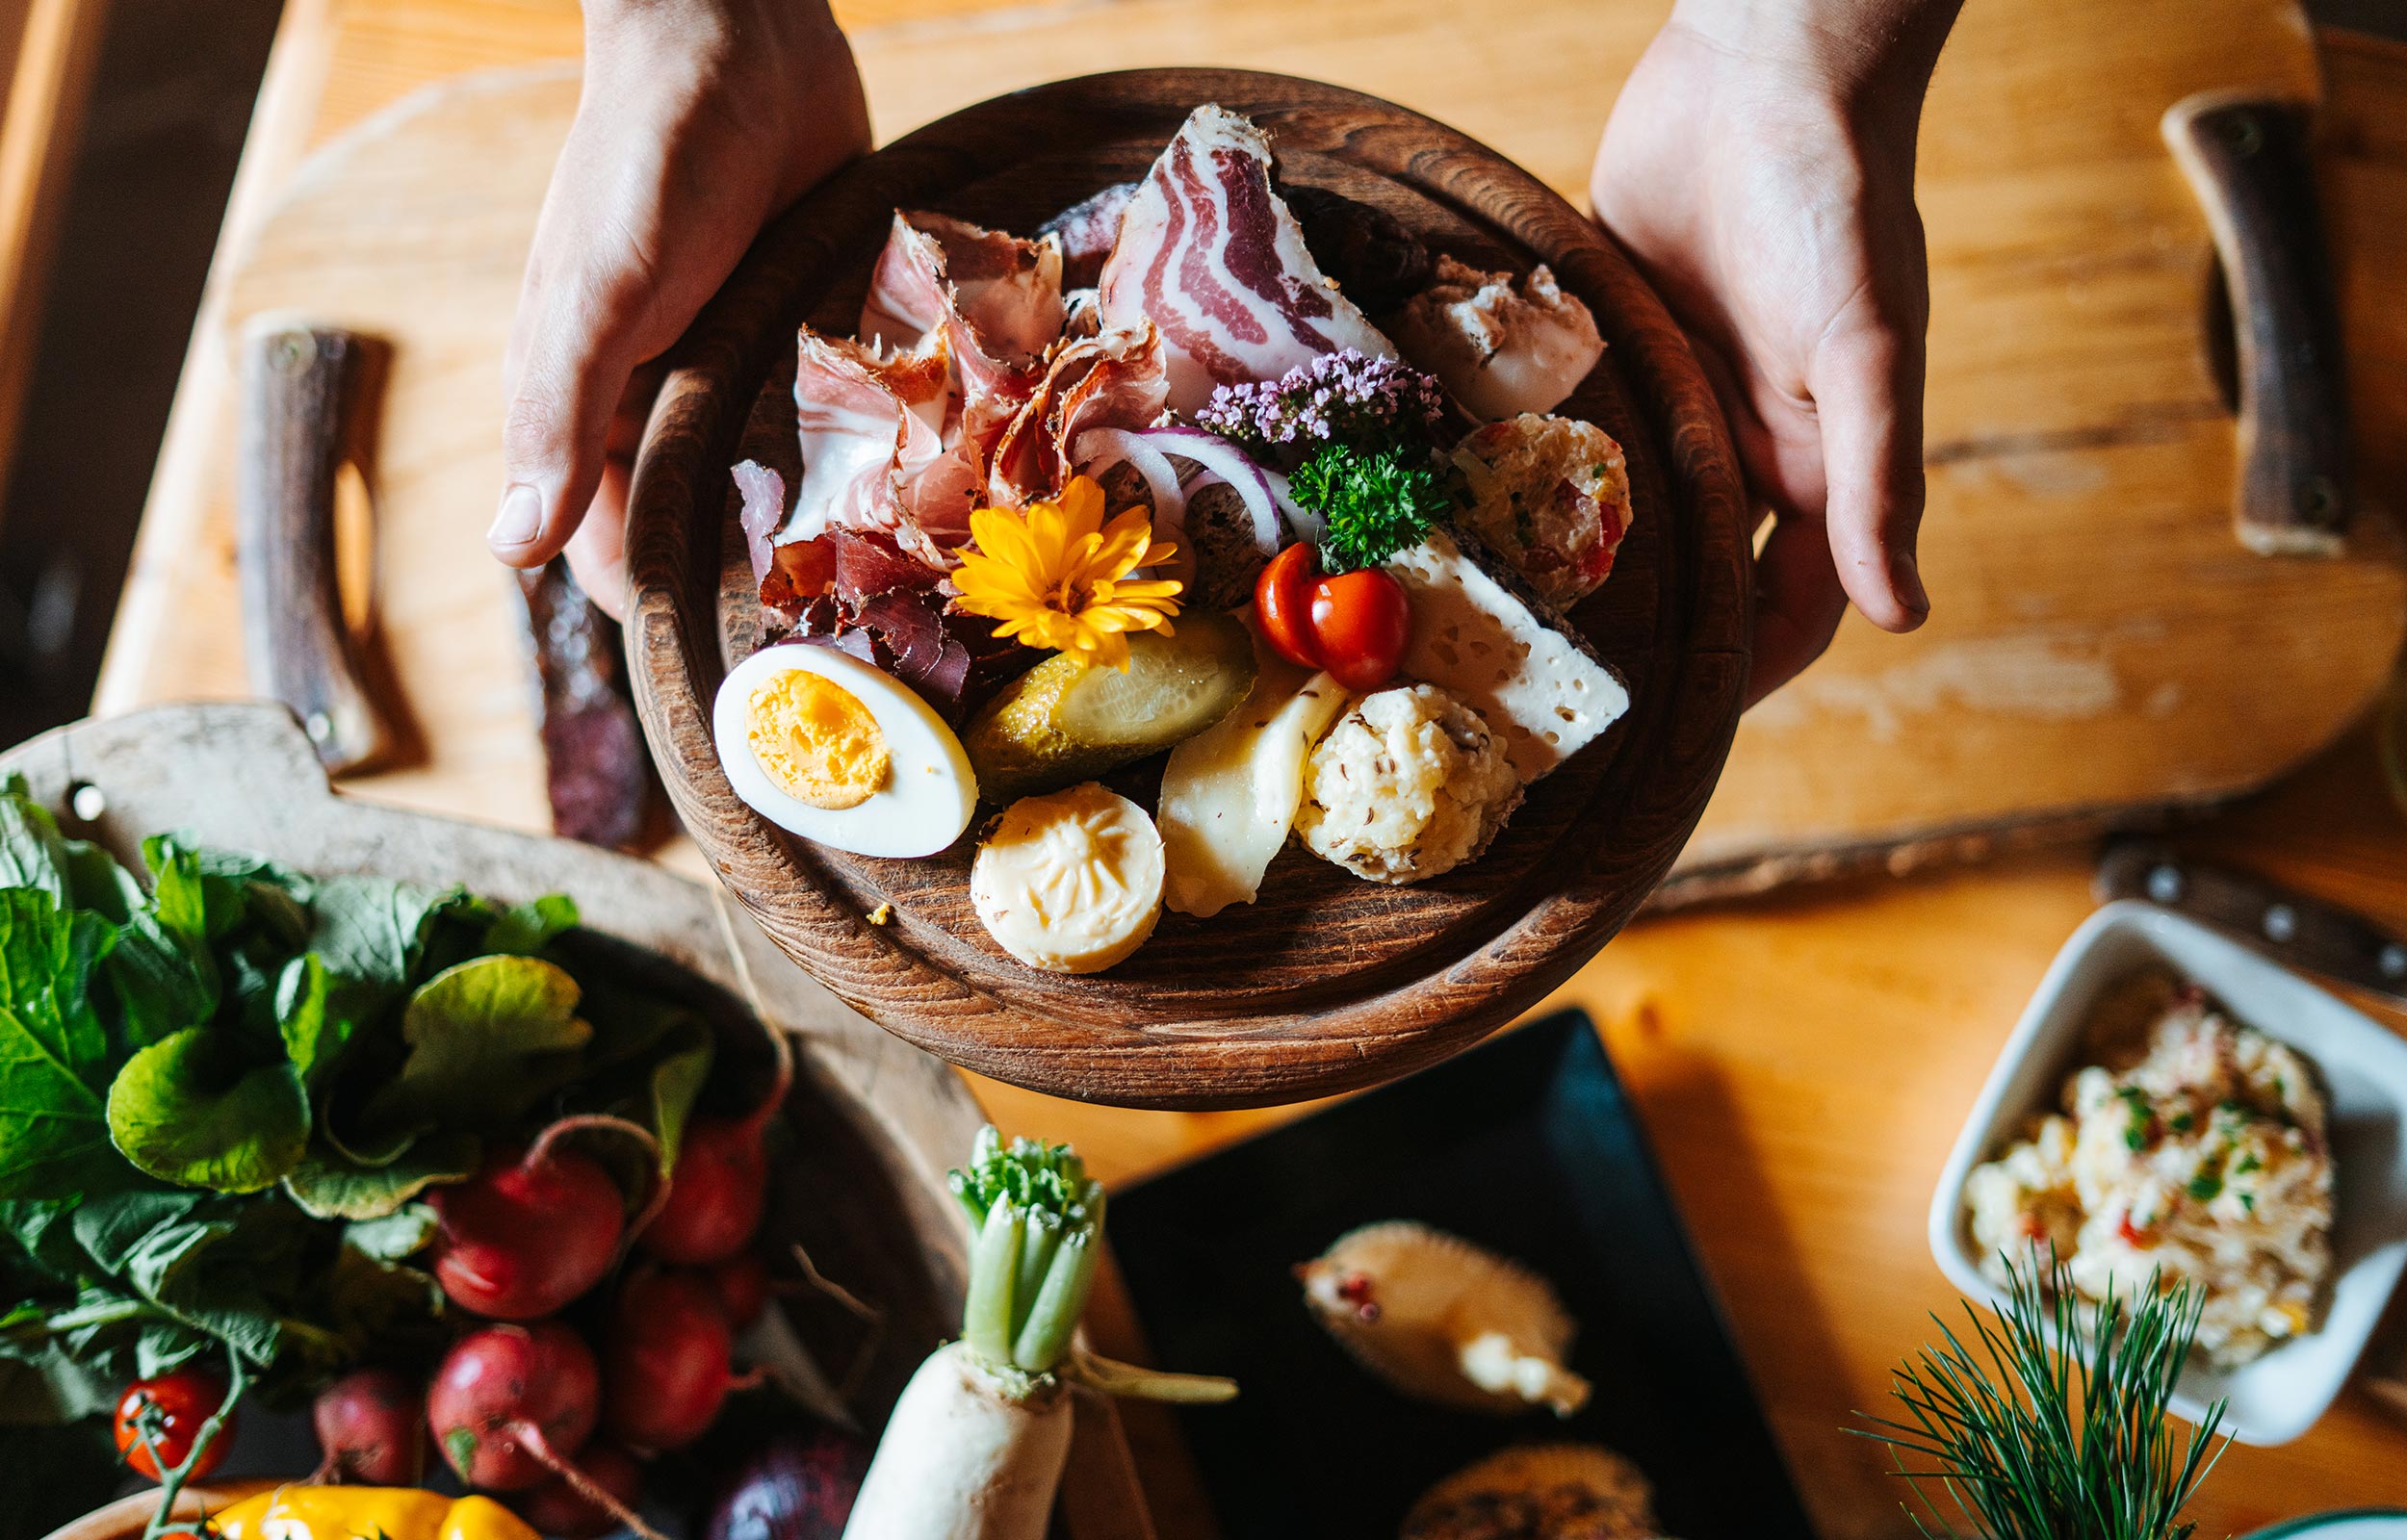 Someone holding a wooden board displaying bacon, eggs, cheese and other delicacies on it.